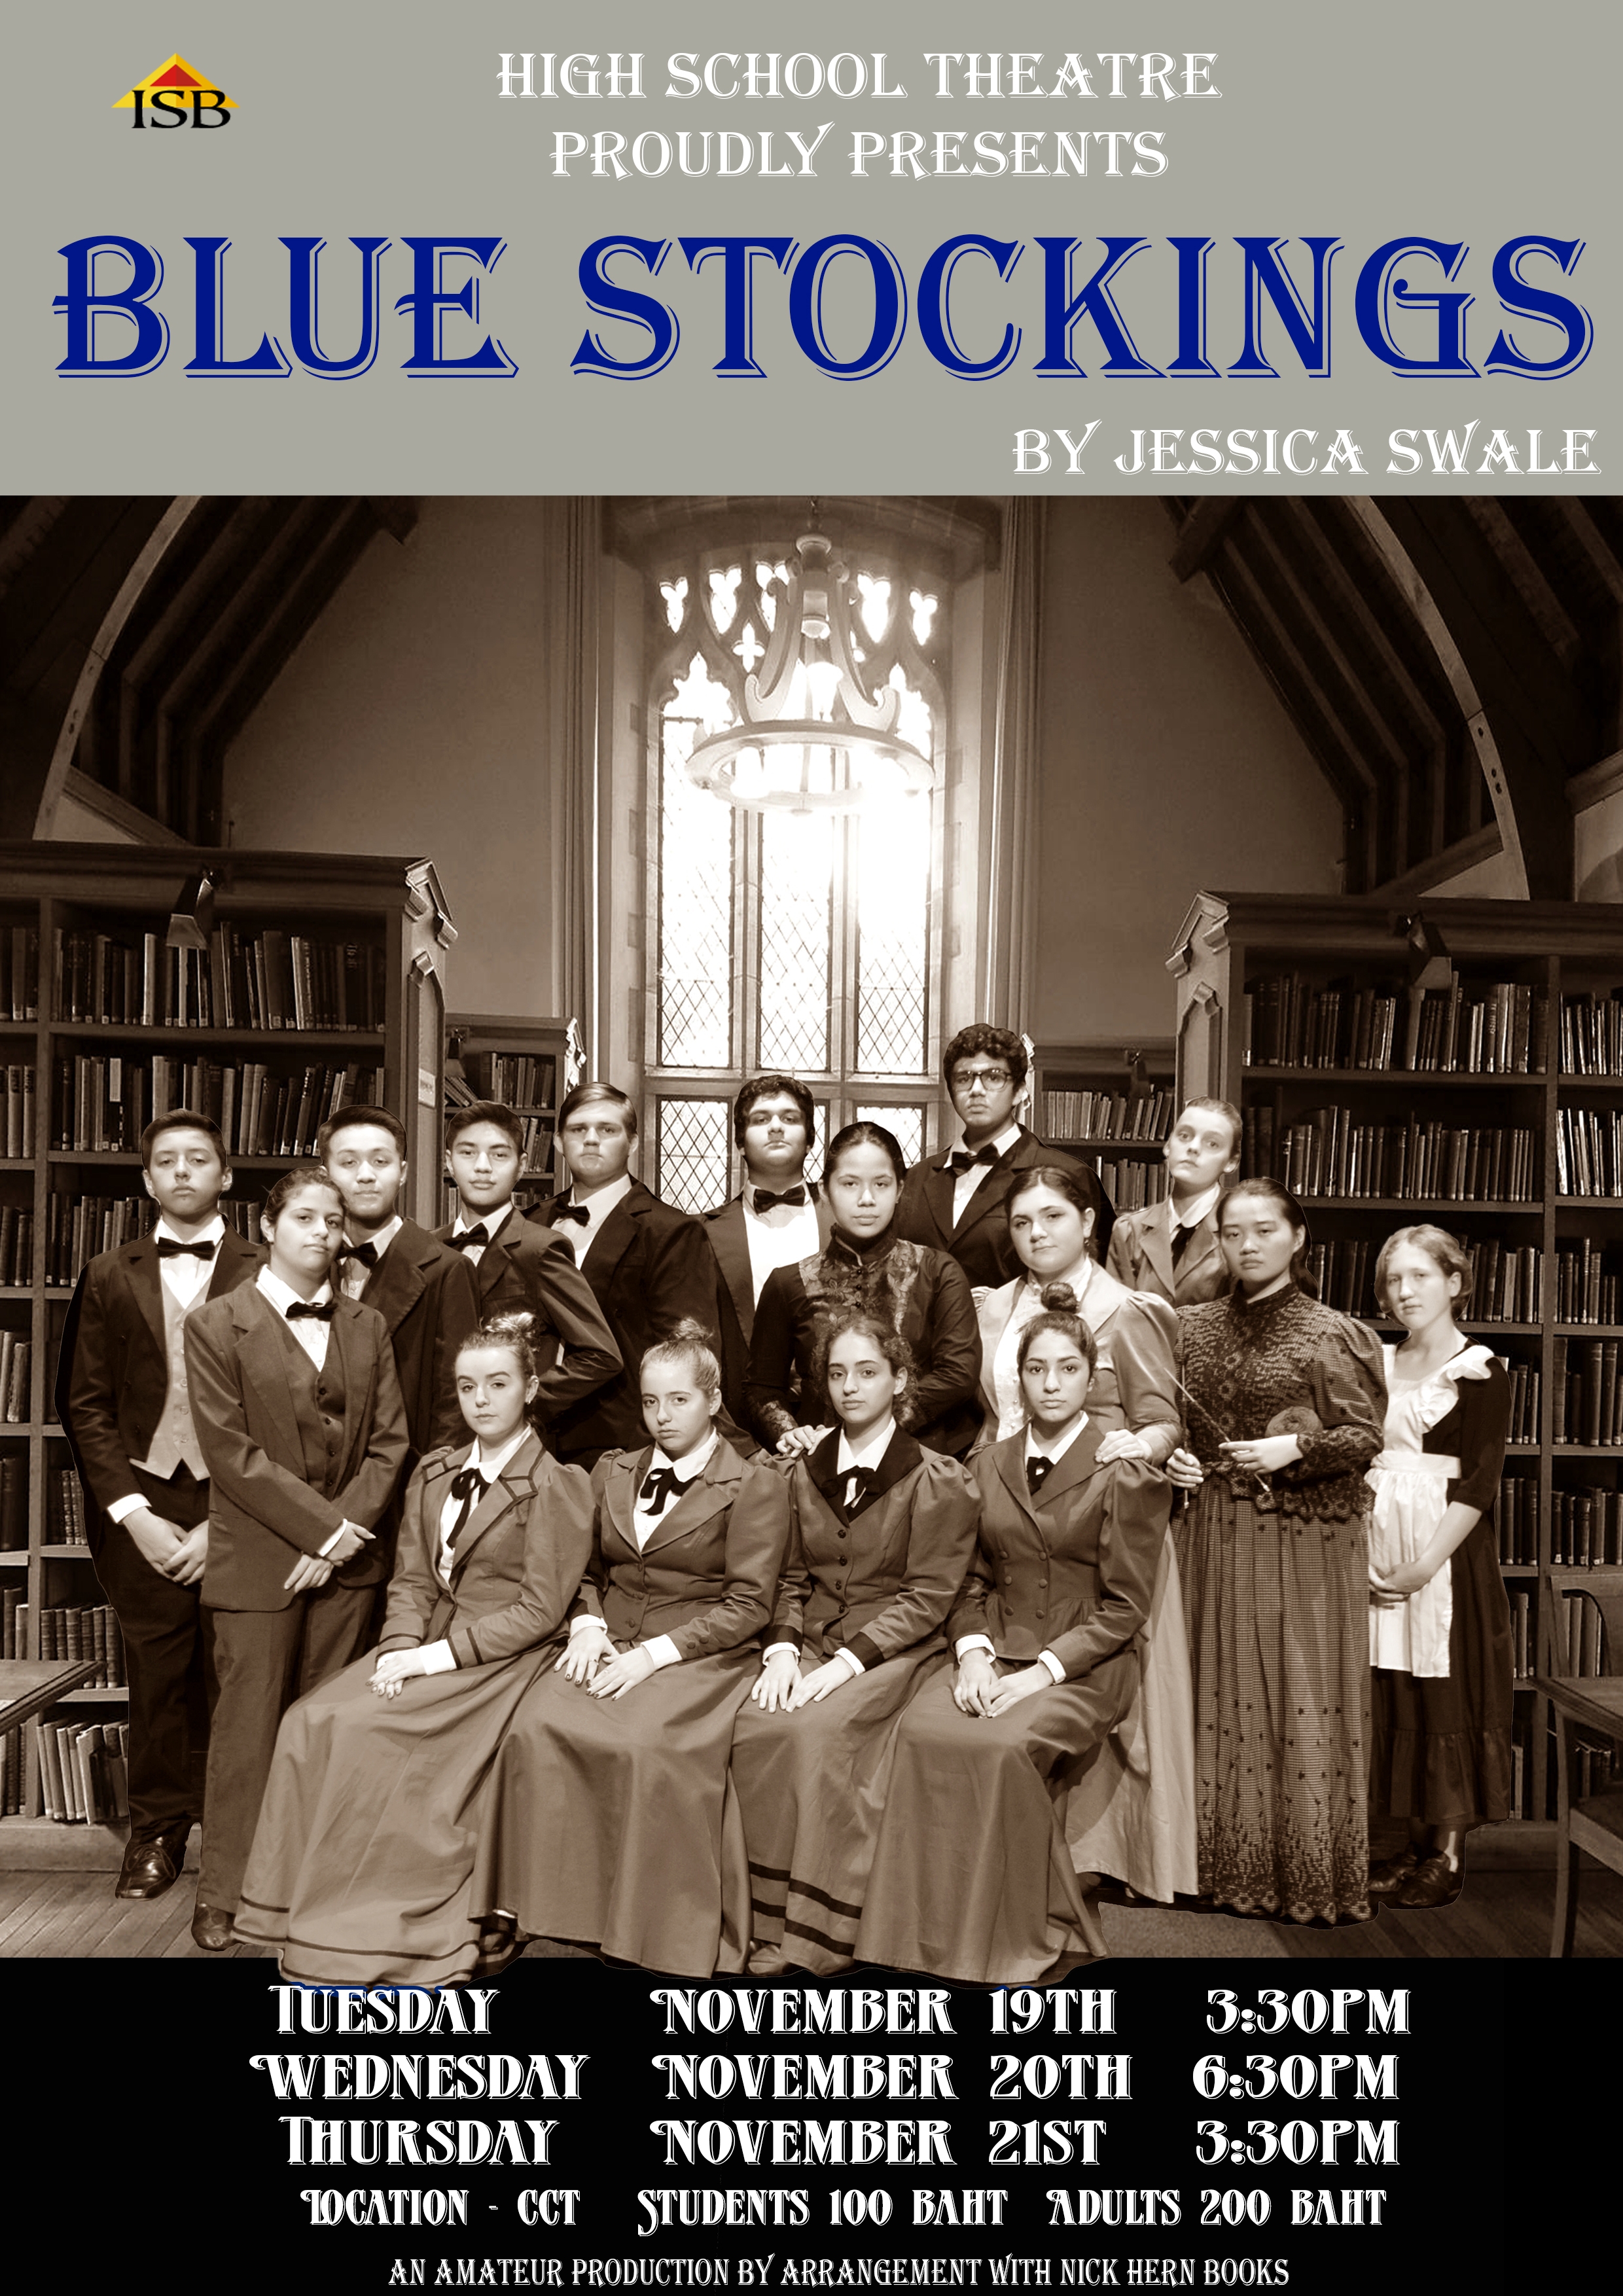 BLUE STOCKINGS - by Jessica Swale